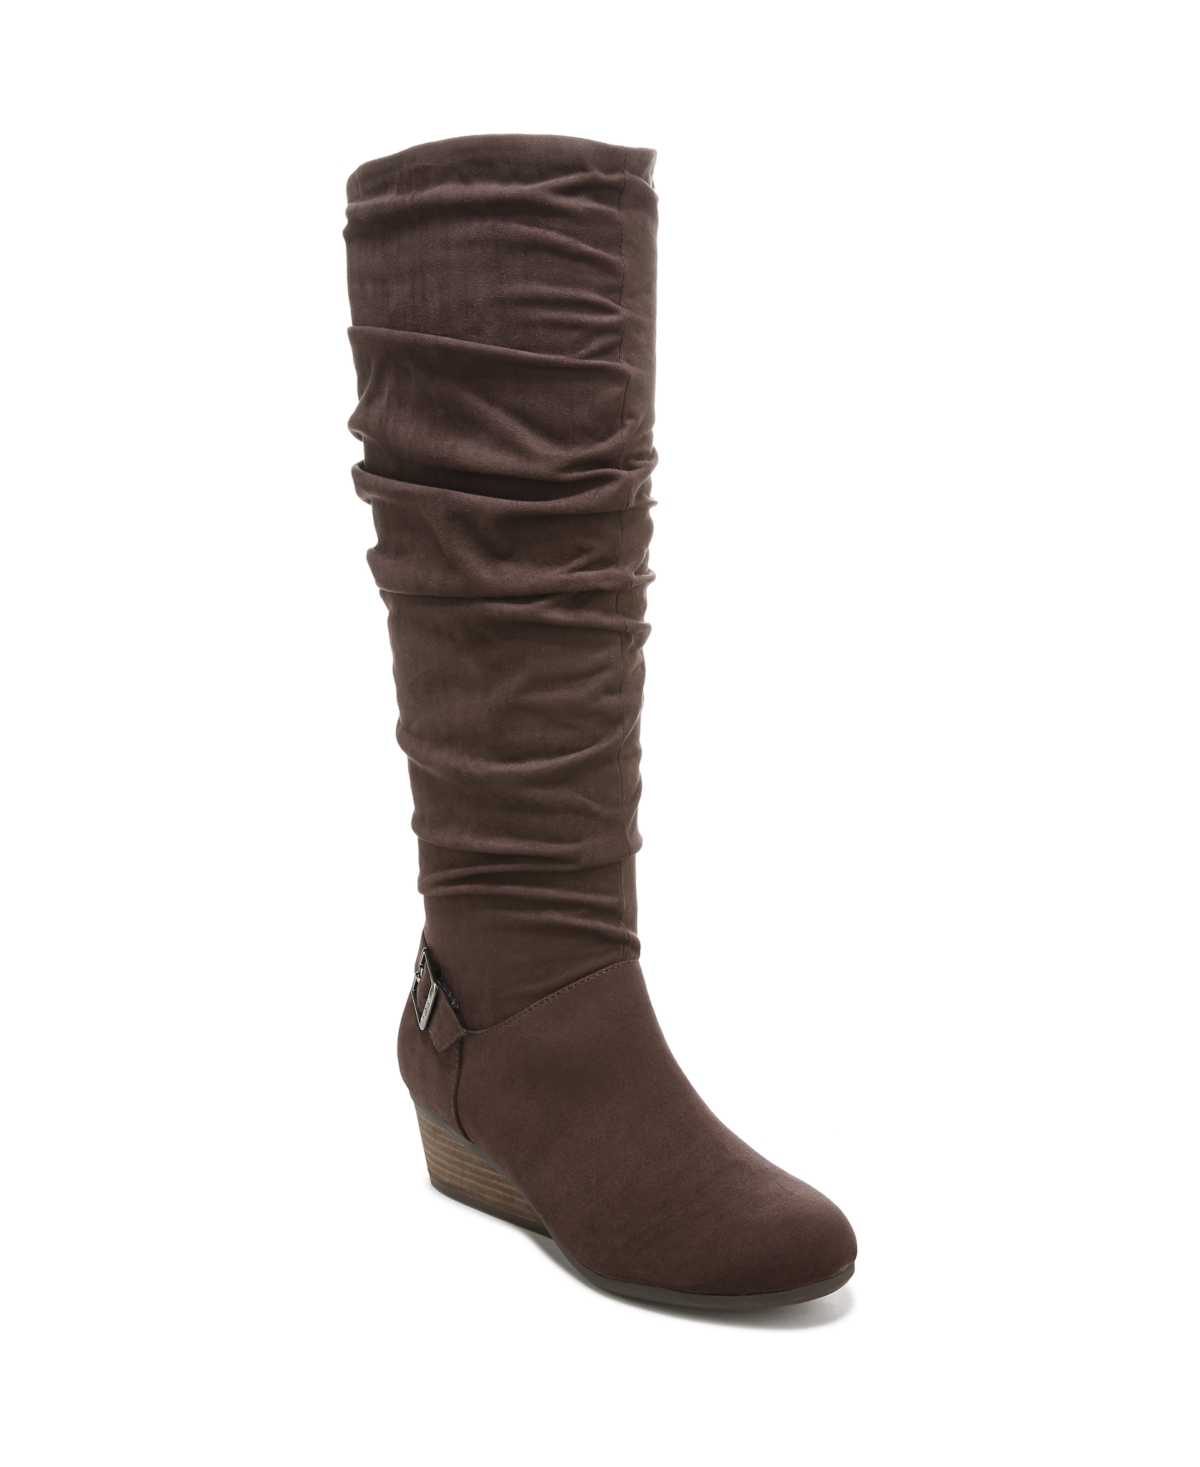 UPC 736715606335 product image for Dr. Scholl's Women's Break Free High Shaft Boots Women's Shoes | upcitemdb.com